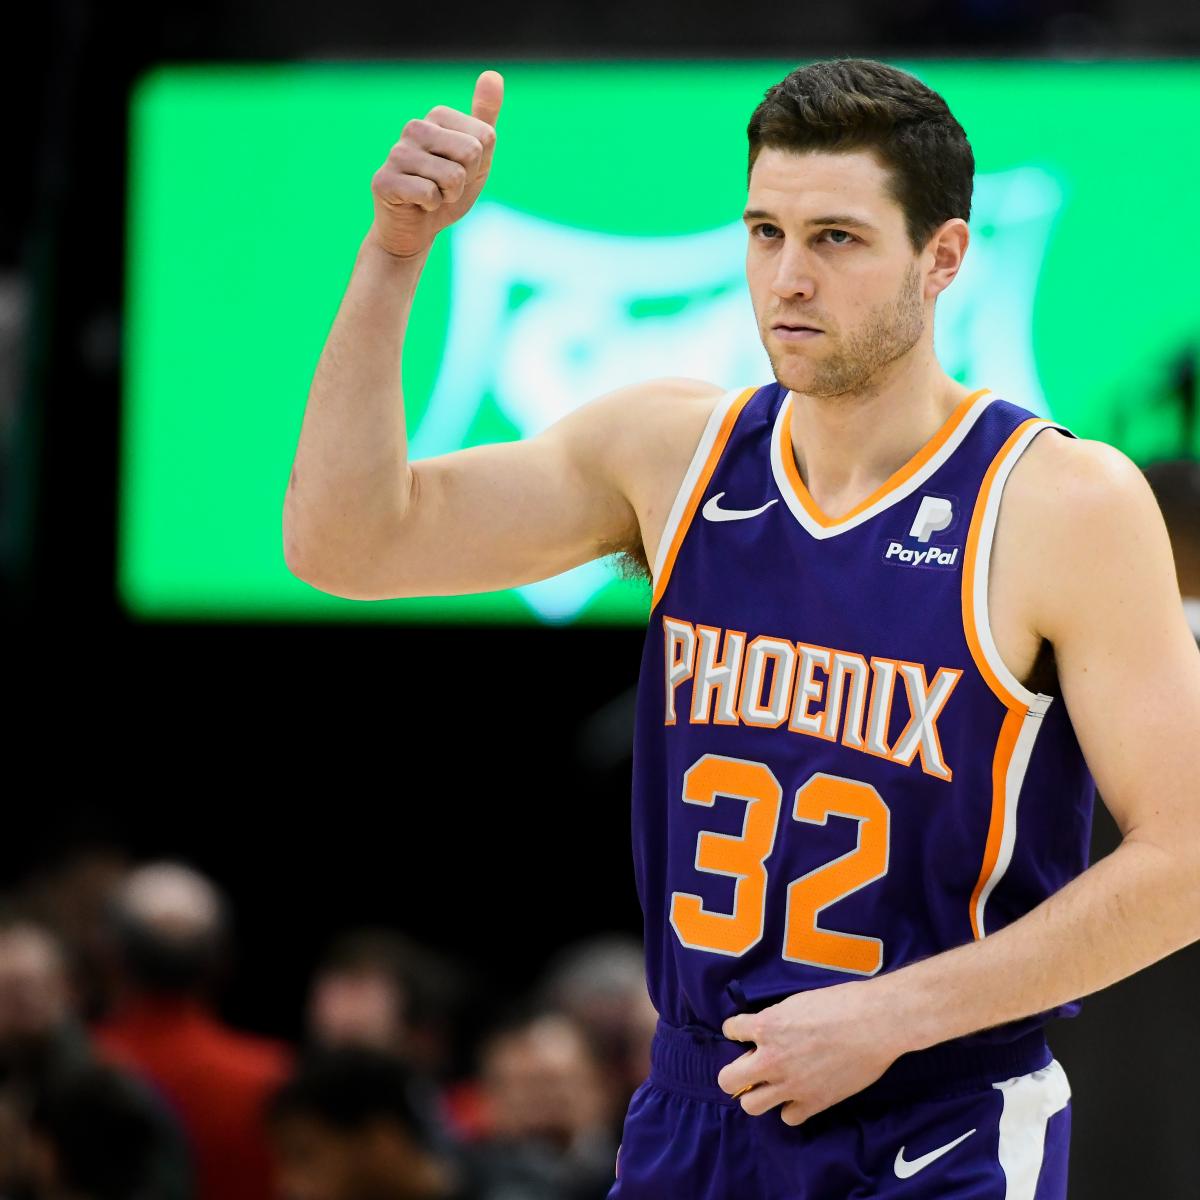 Video: Jimmer Fredette Gets Ovation from Jazz Crowd After Scoring for Suns